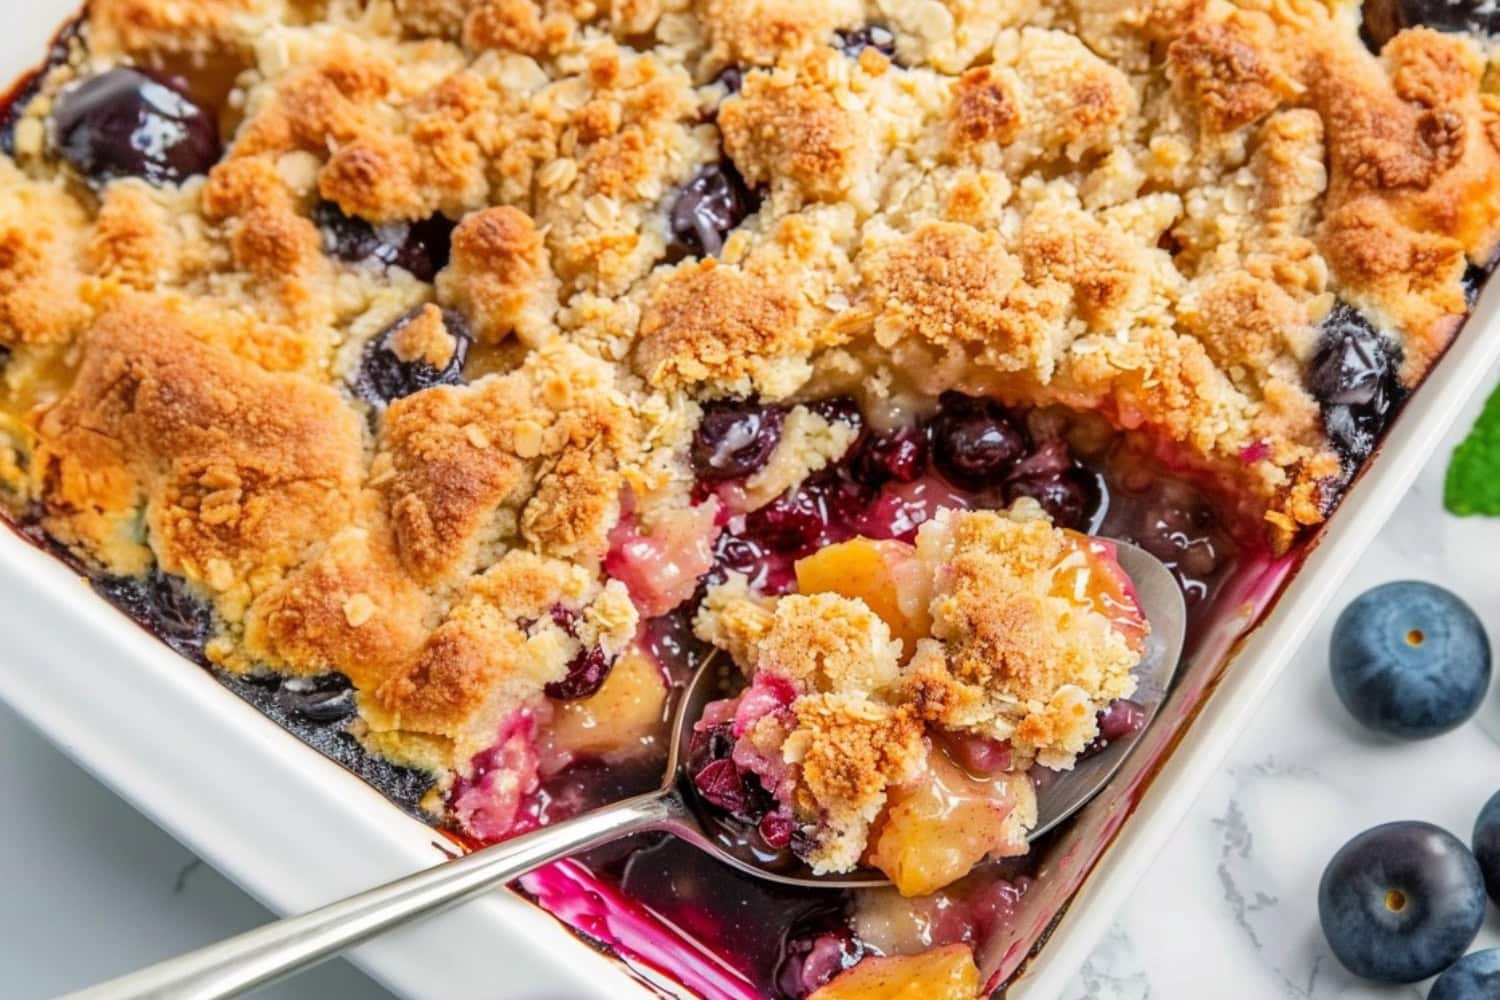 Spoon scooping peach and blueberry cobbler from baking dish.